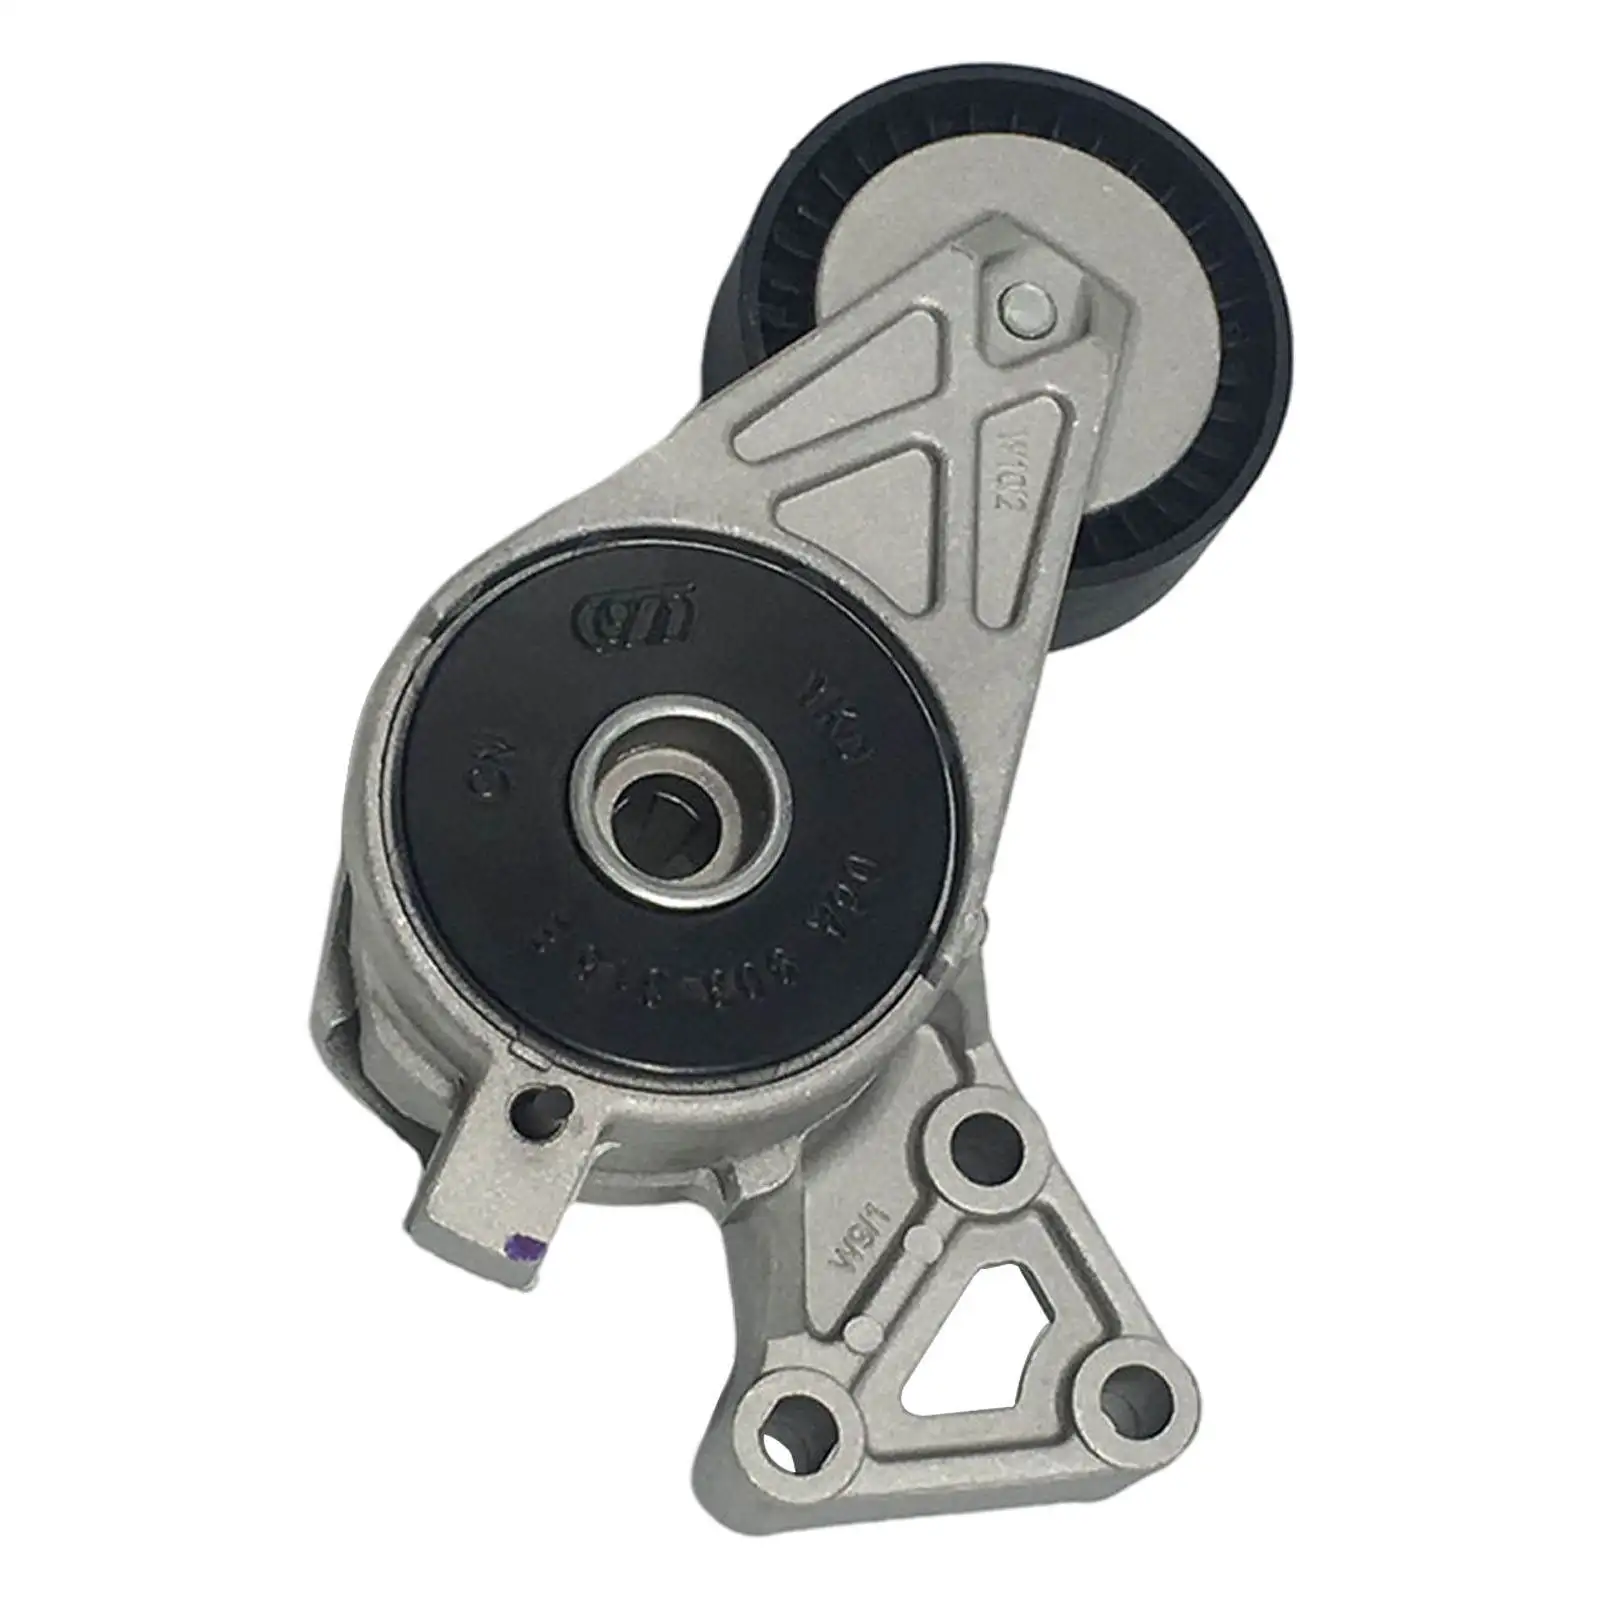 A/C Automatic Belt Tensioner with Pulley for VW Golf Car Parts Accessories 06A903315E Replacement